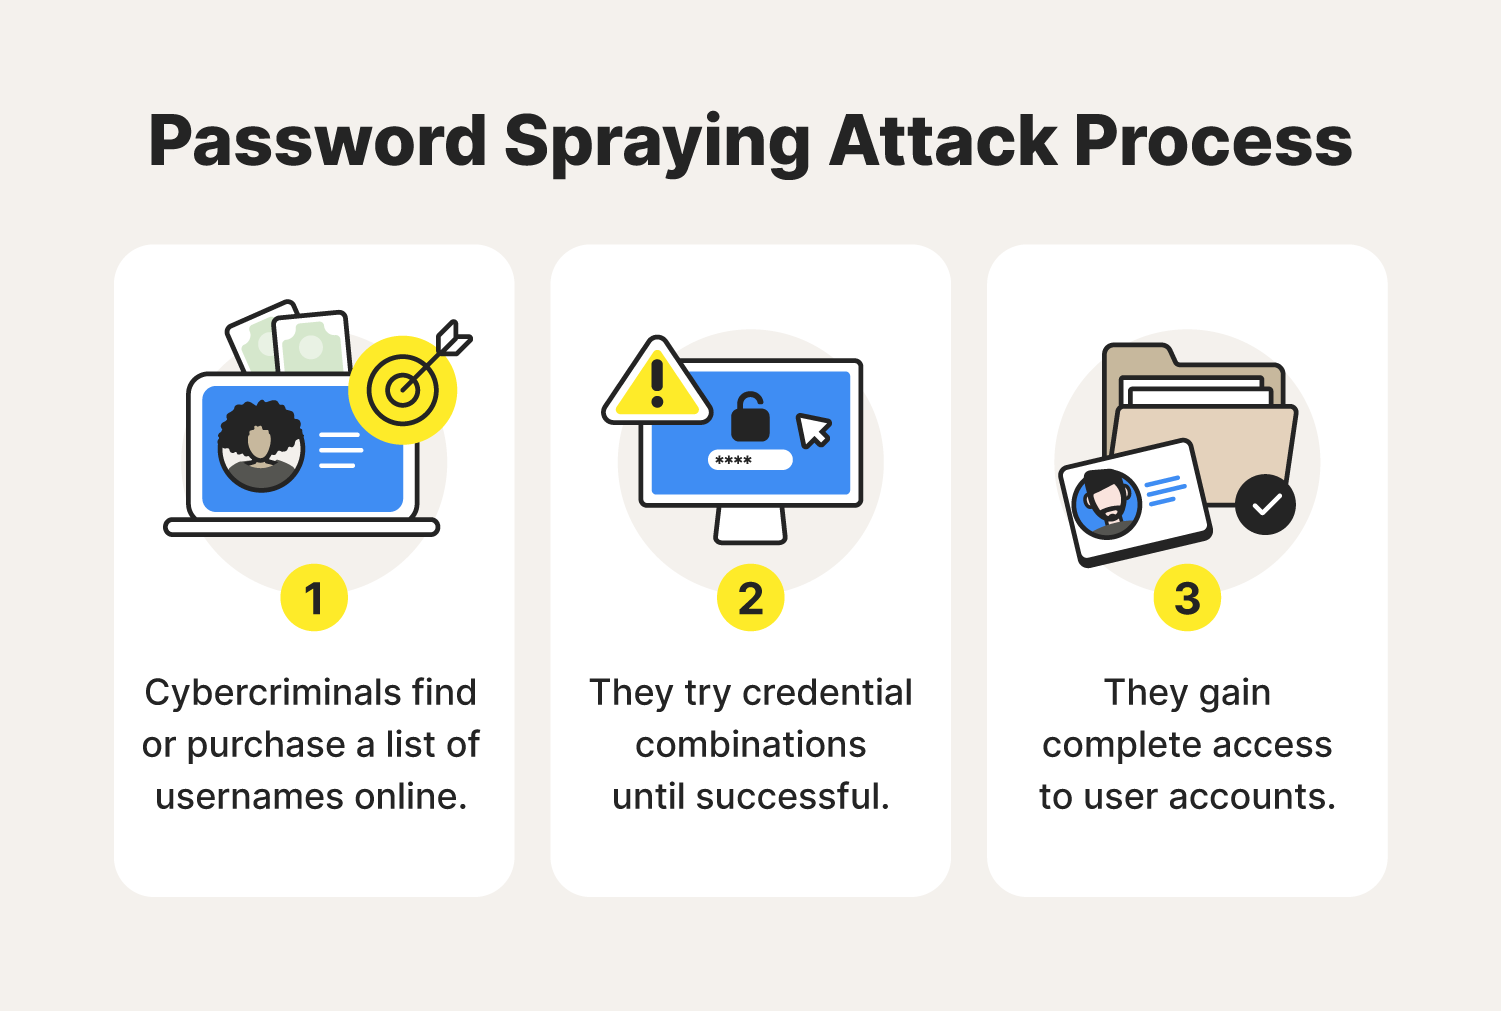 Three illustrations help depict the process of a password spraying attack.